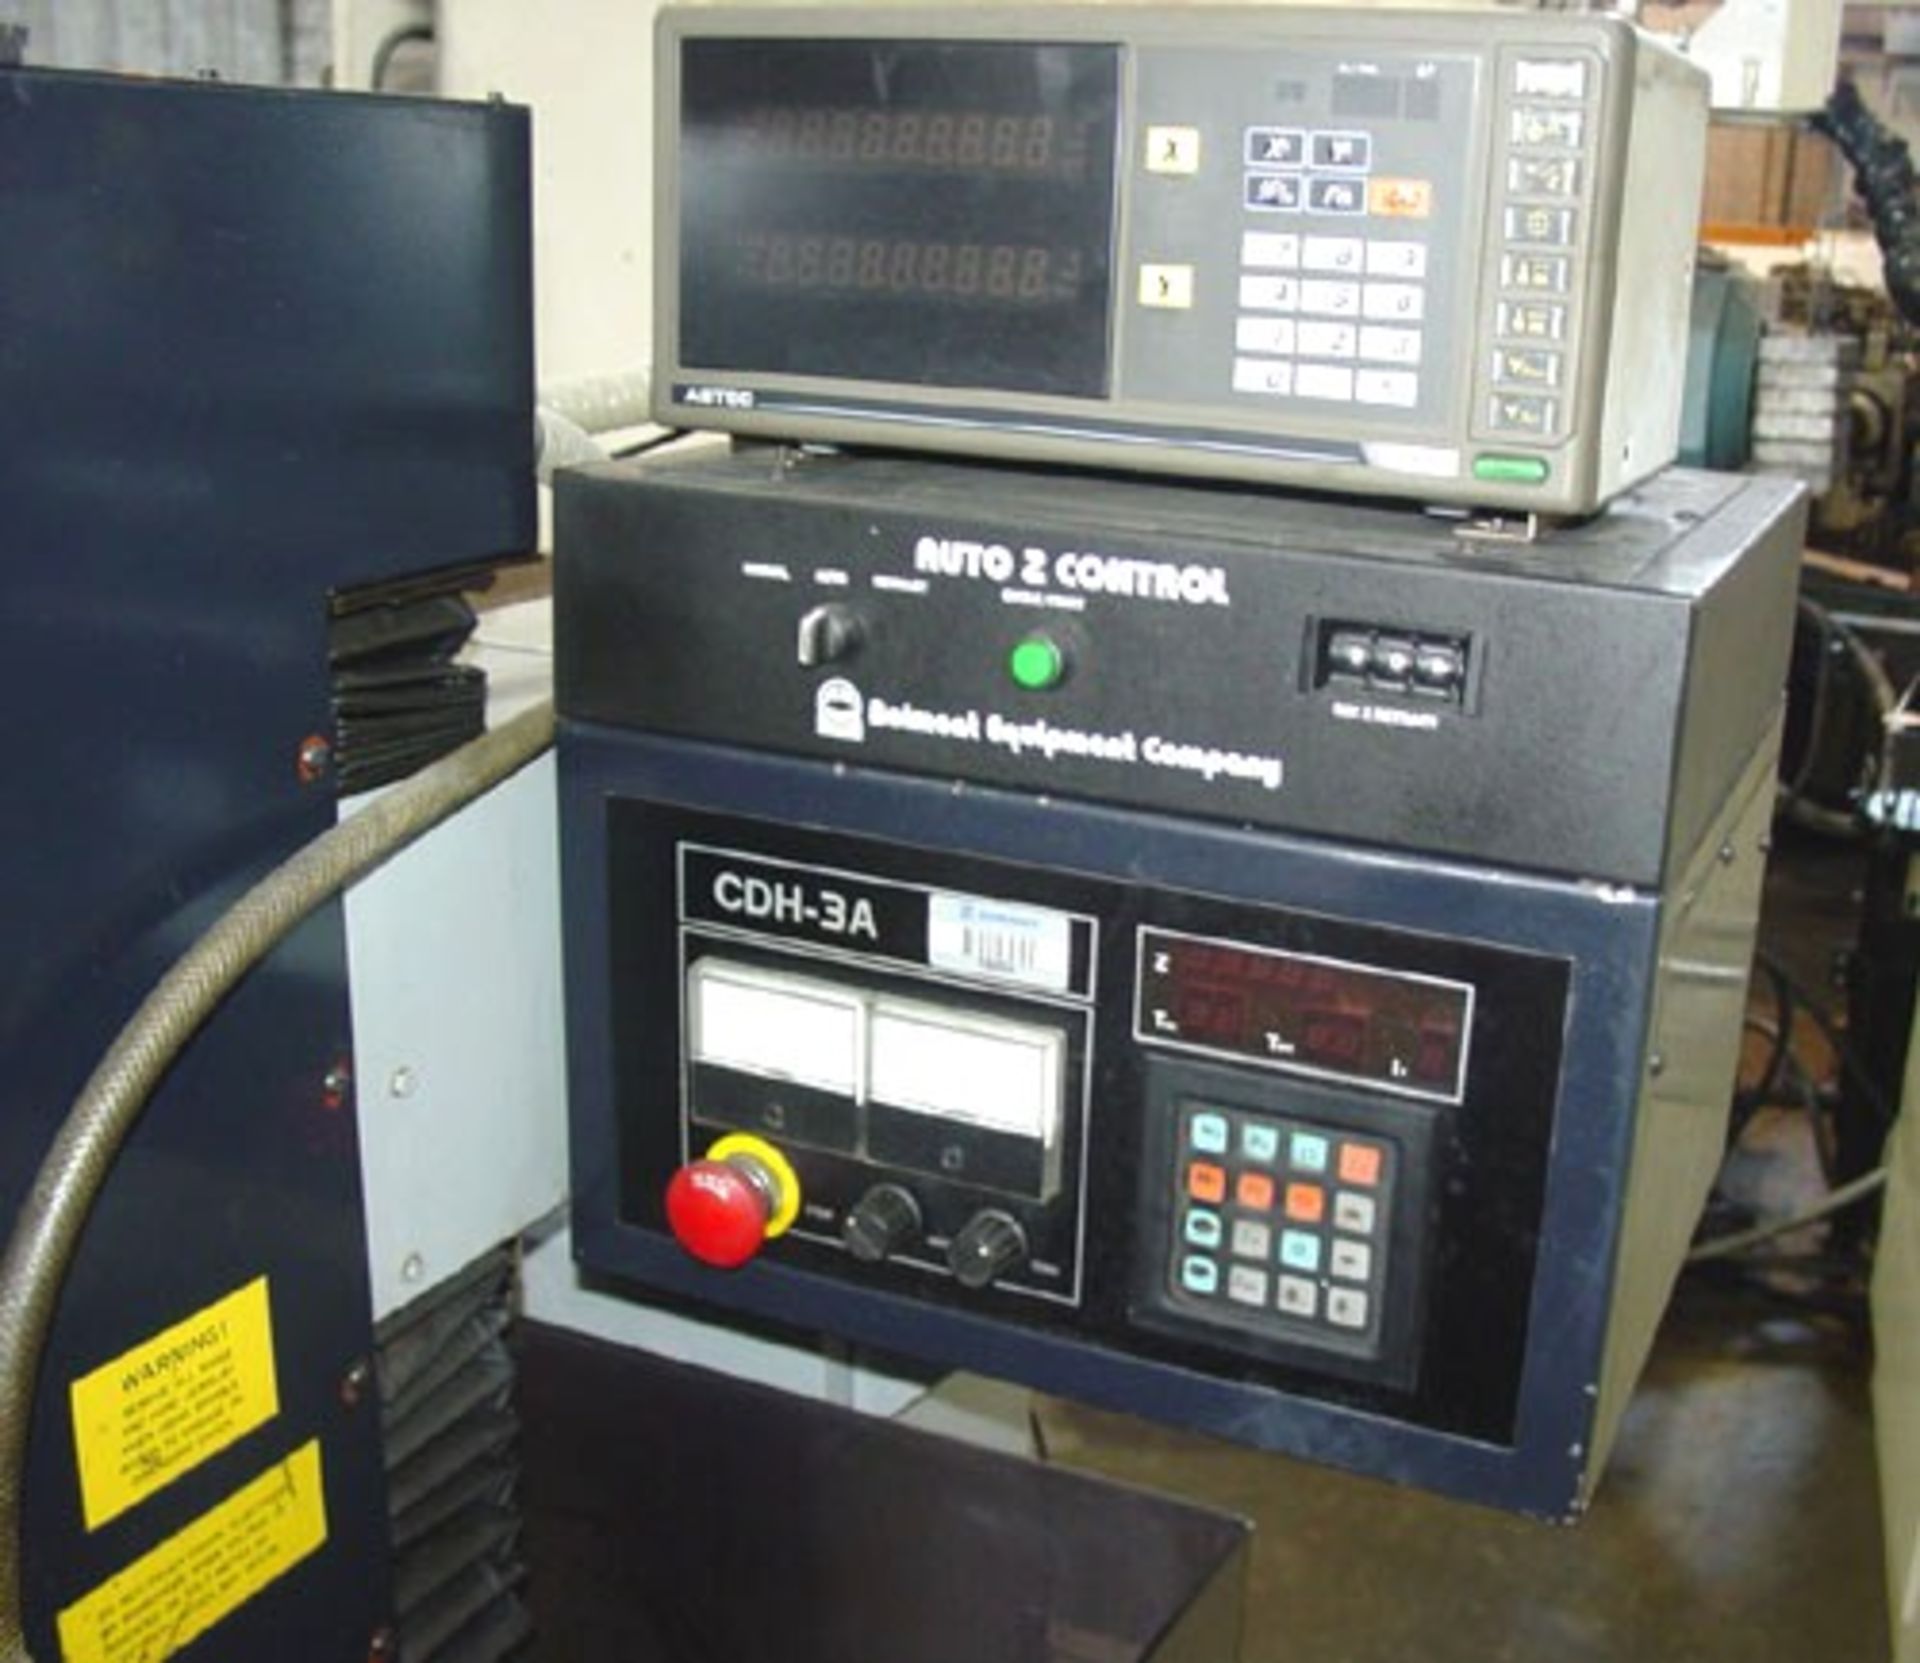 ASTEC EDM HOLE DRILLING MACHINE, Model CDH-3A, S/N 83A003199, New 1995 - Image 2 of 6